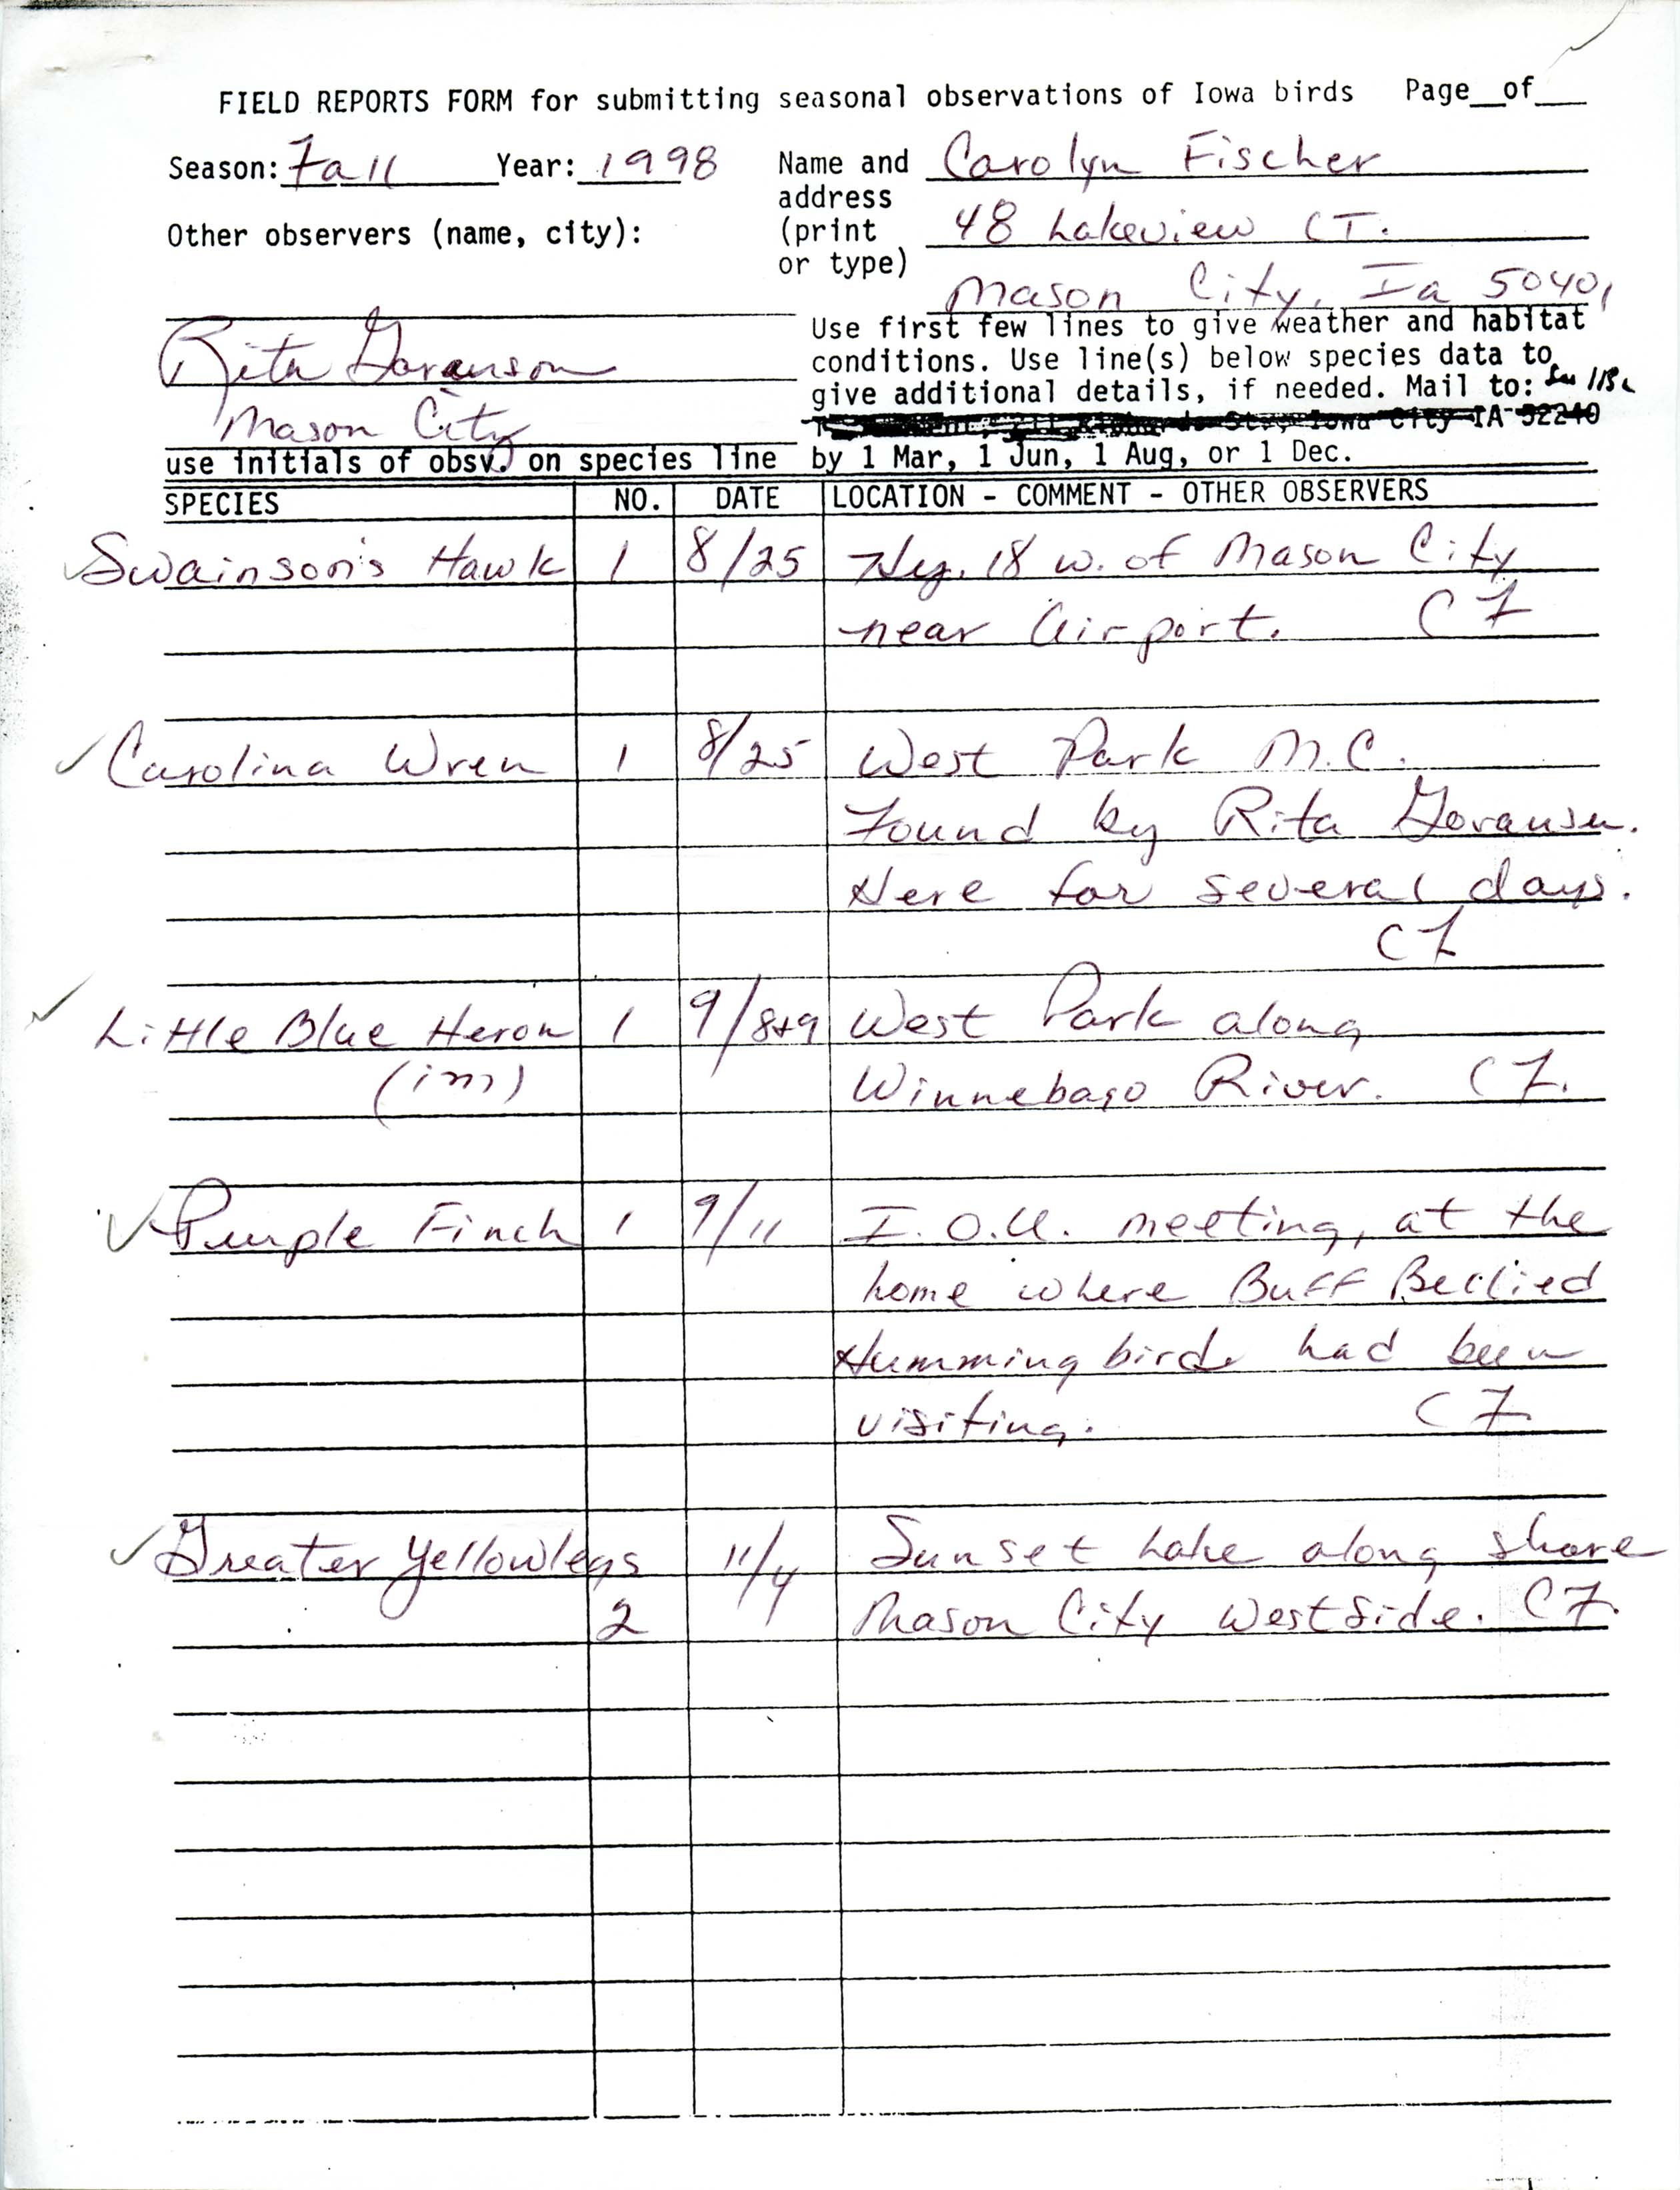 Field reports form for submitting seasonal observations of Iowa birds and letter to Thomas H. Kent contributed by Carolyn J. Fischer, December 1, 1998